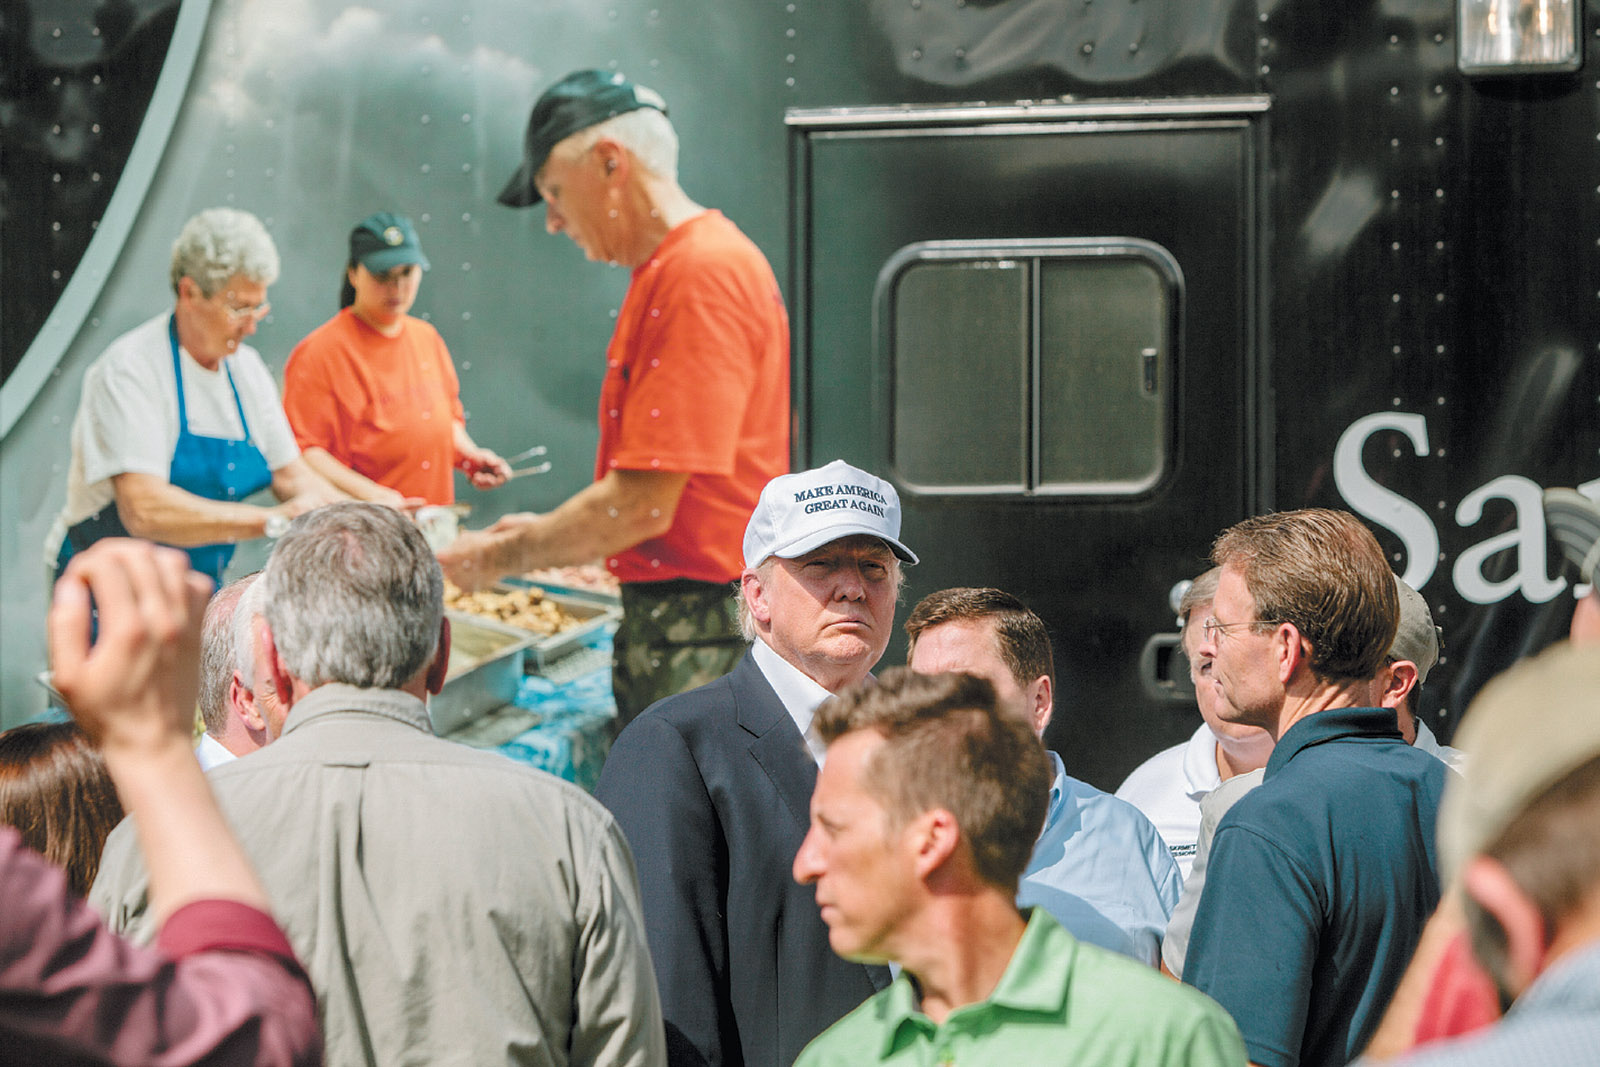 Donald Trump in front of the Samaritan’s Purse mobile kitchen at an event for flood victims, Greenwell Springs Baptist Church, near Baton Rouge, Louisiana, August 2016